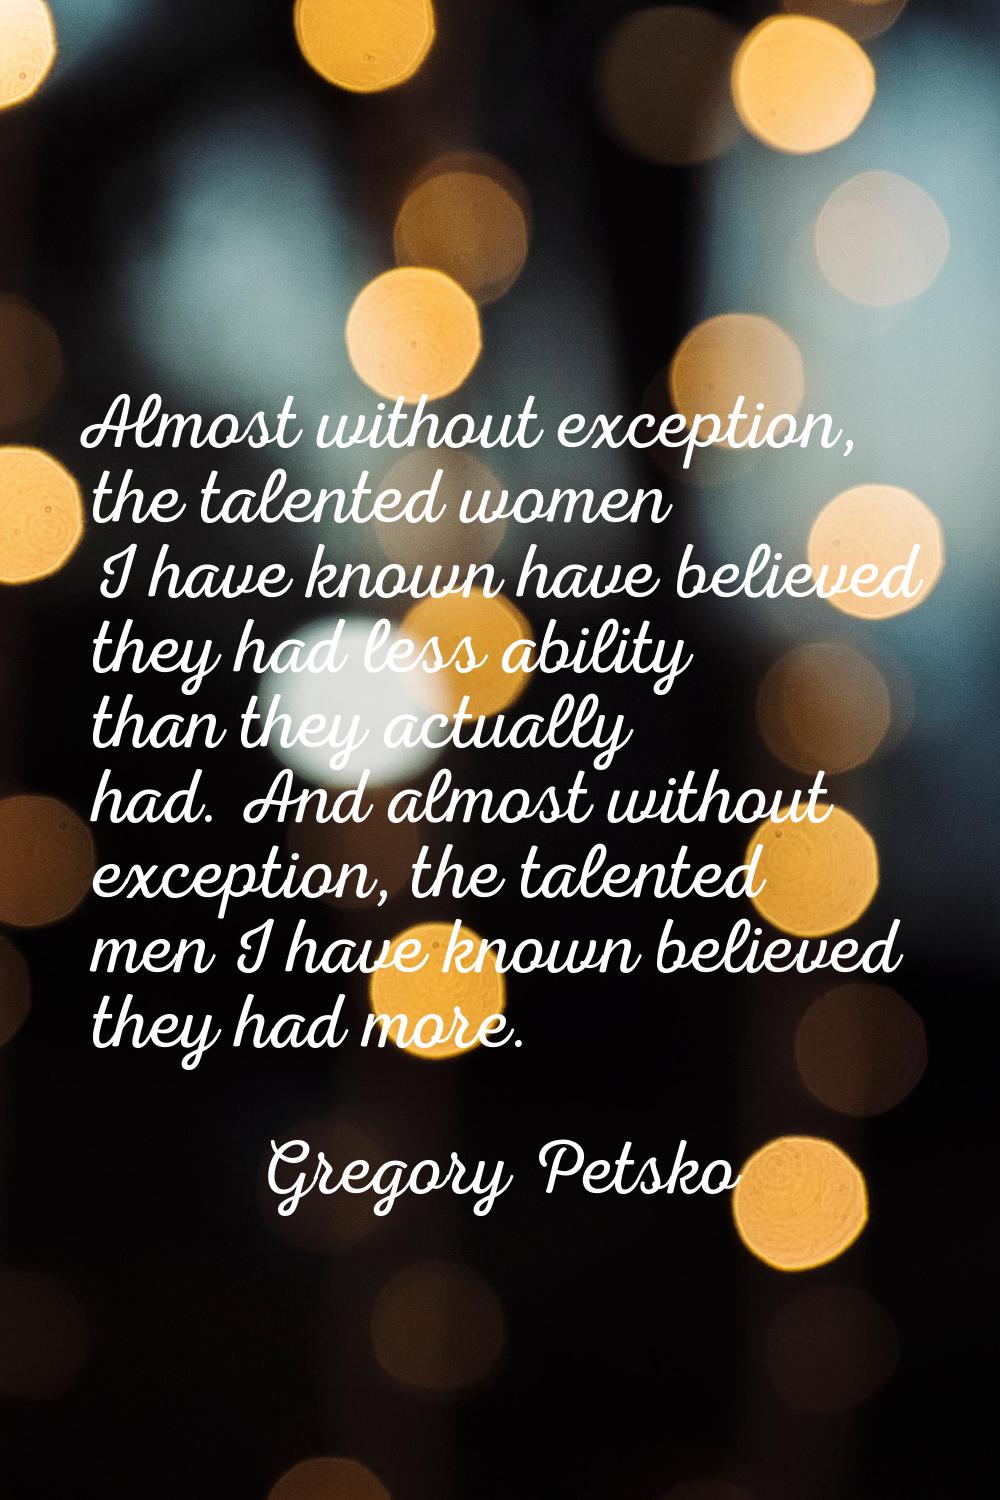 Almost without exception, the talented women I have known have believed they had less ability than 